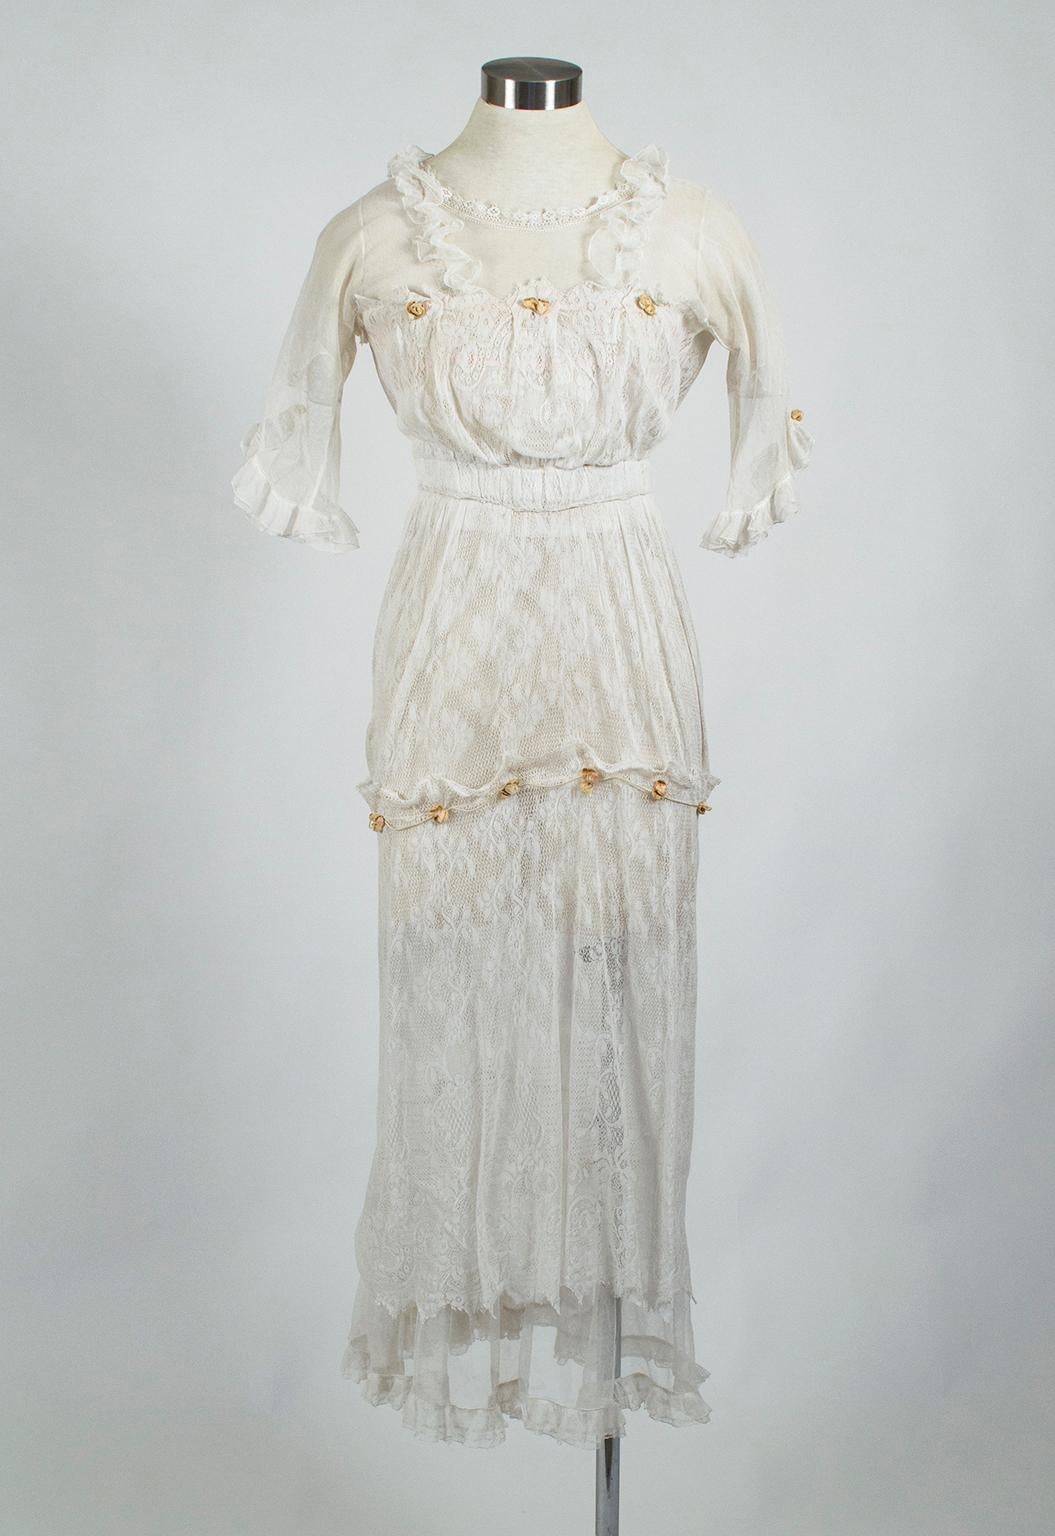 It’s easy to see why tea dresses such as this were sometimes called “pneumonia dresses”: their weightlessness provided little coverage and even less warmth (though the pounds of undergarments certainly compensated for both). Replete with the